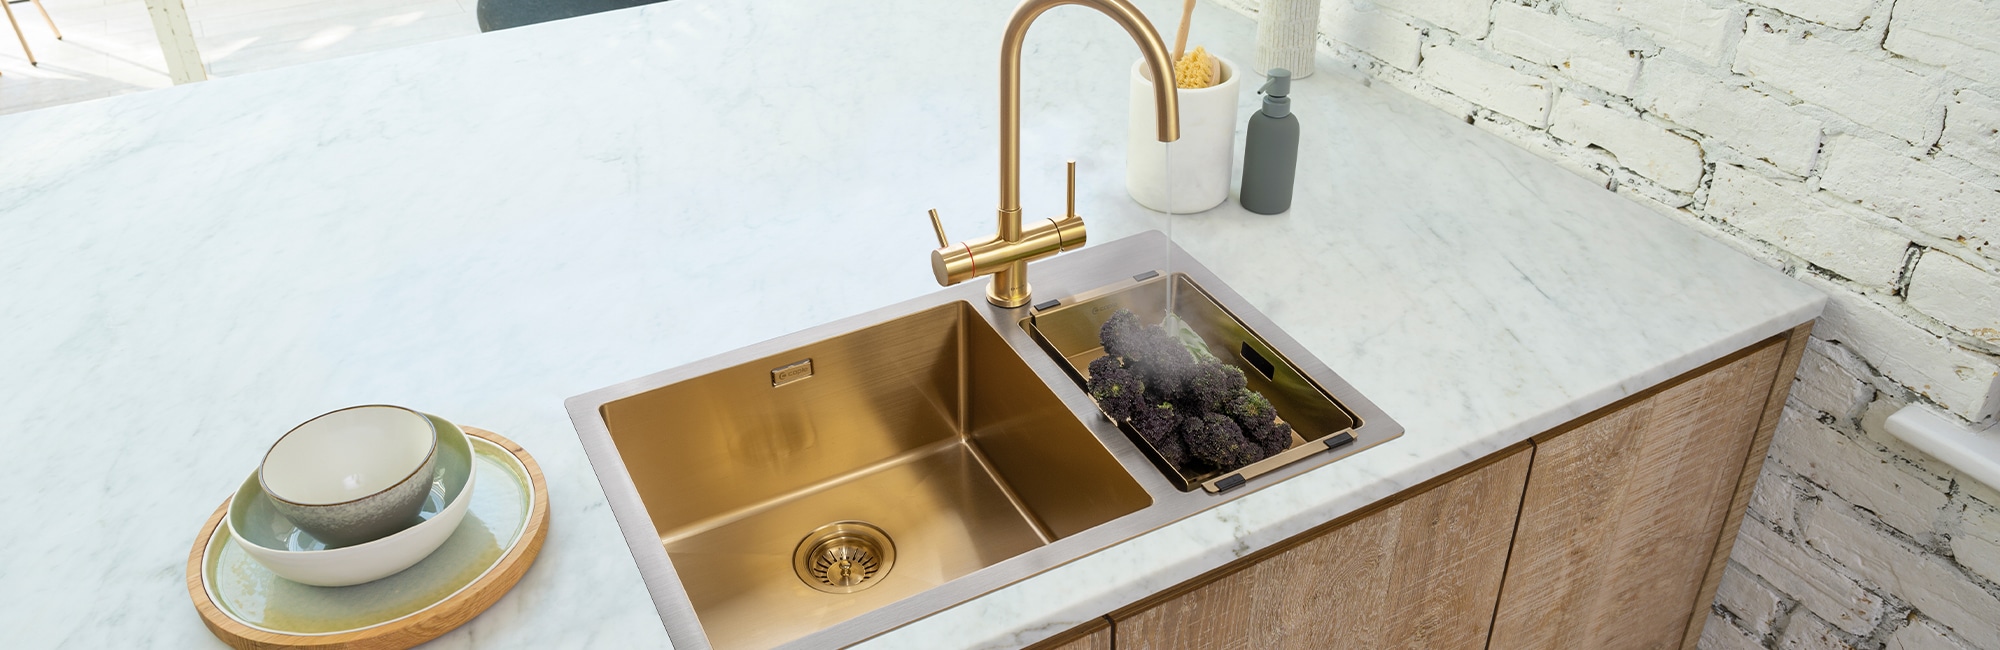 Gold & stainless steel sink with matching gold hot water tap